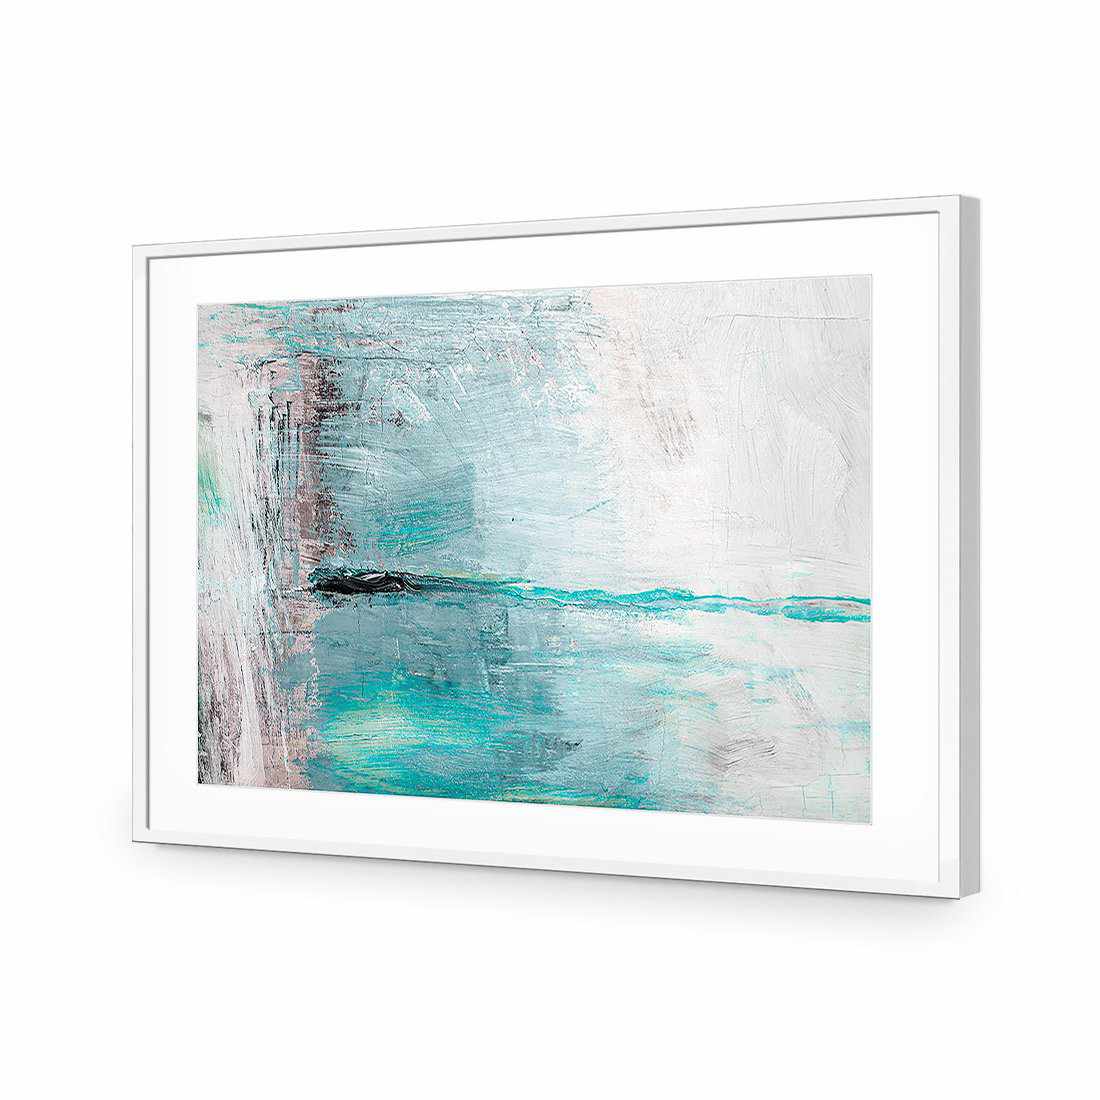 Painting The Sky-Acrylic-Wall Art Design-With Border-Acrylic - White Frame-45x30cm-Wall Art Designs